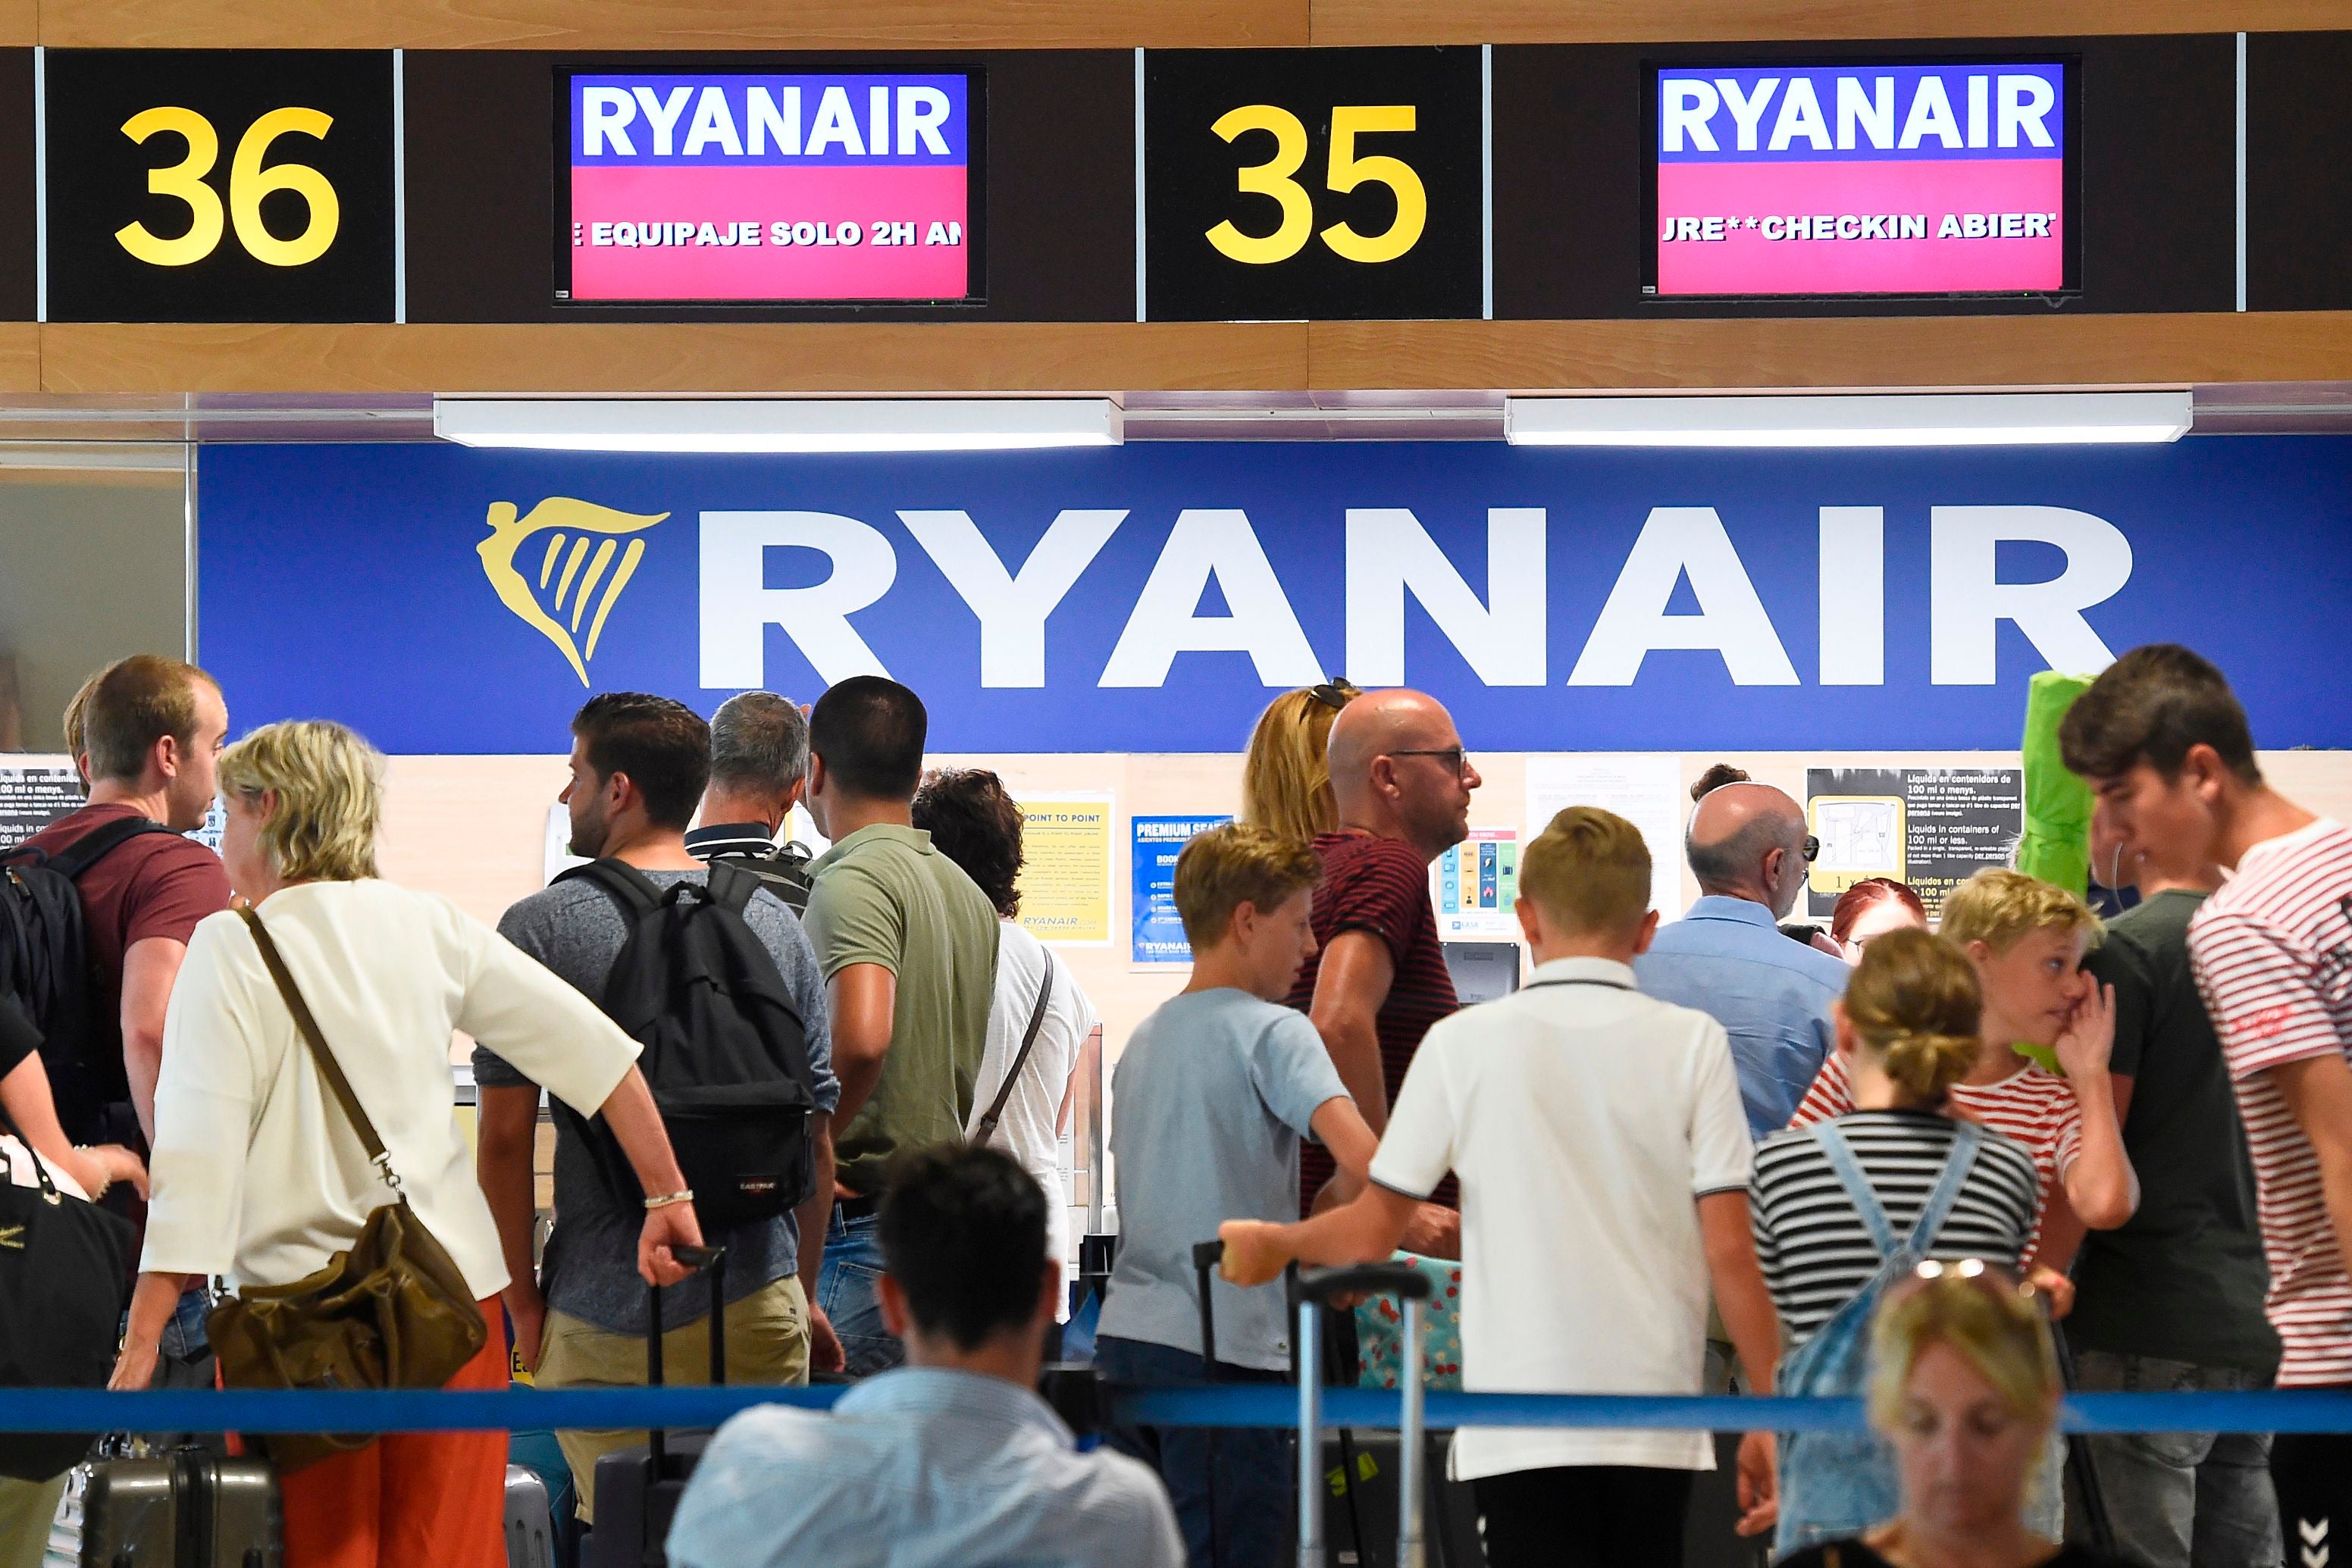 Passengers queue at a Ryanair check-in counter in Valencia